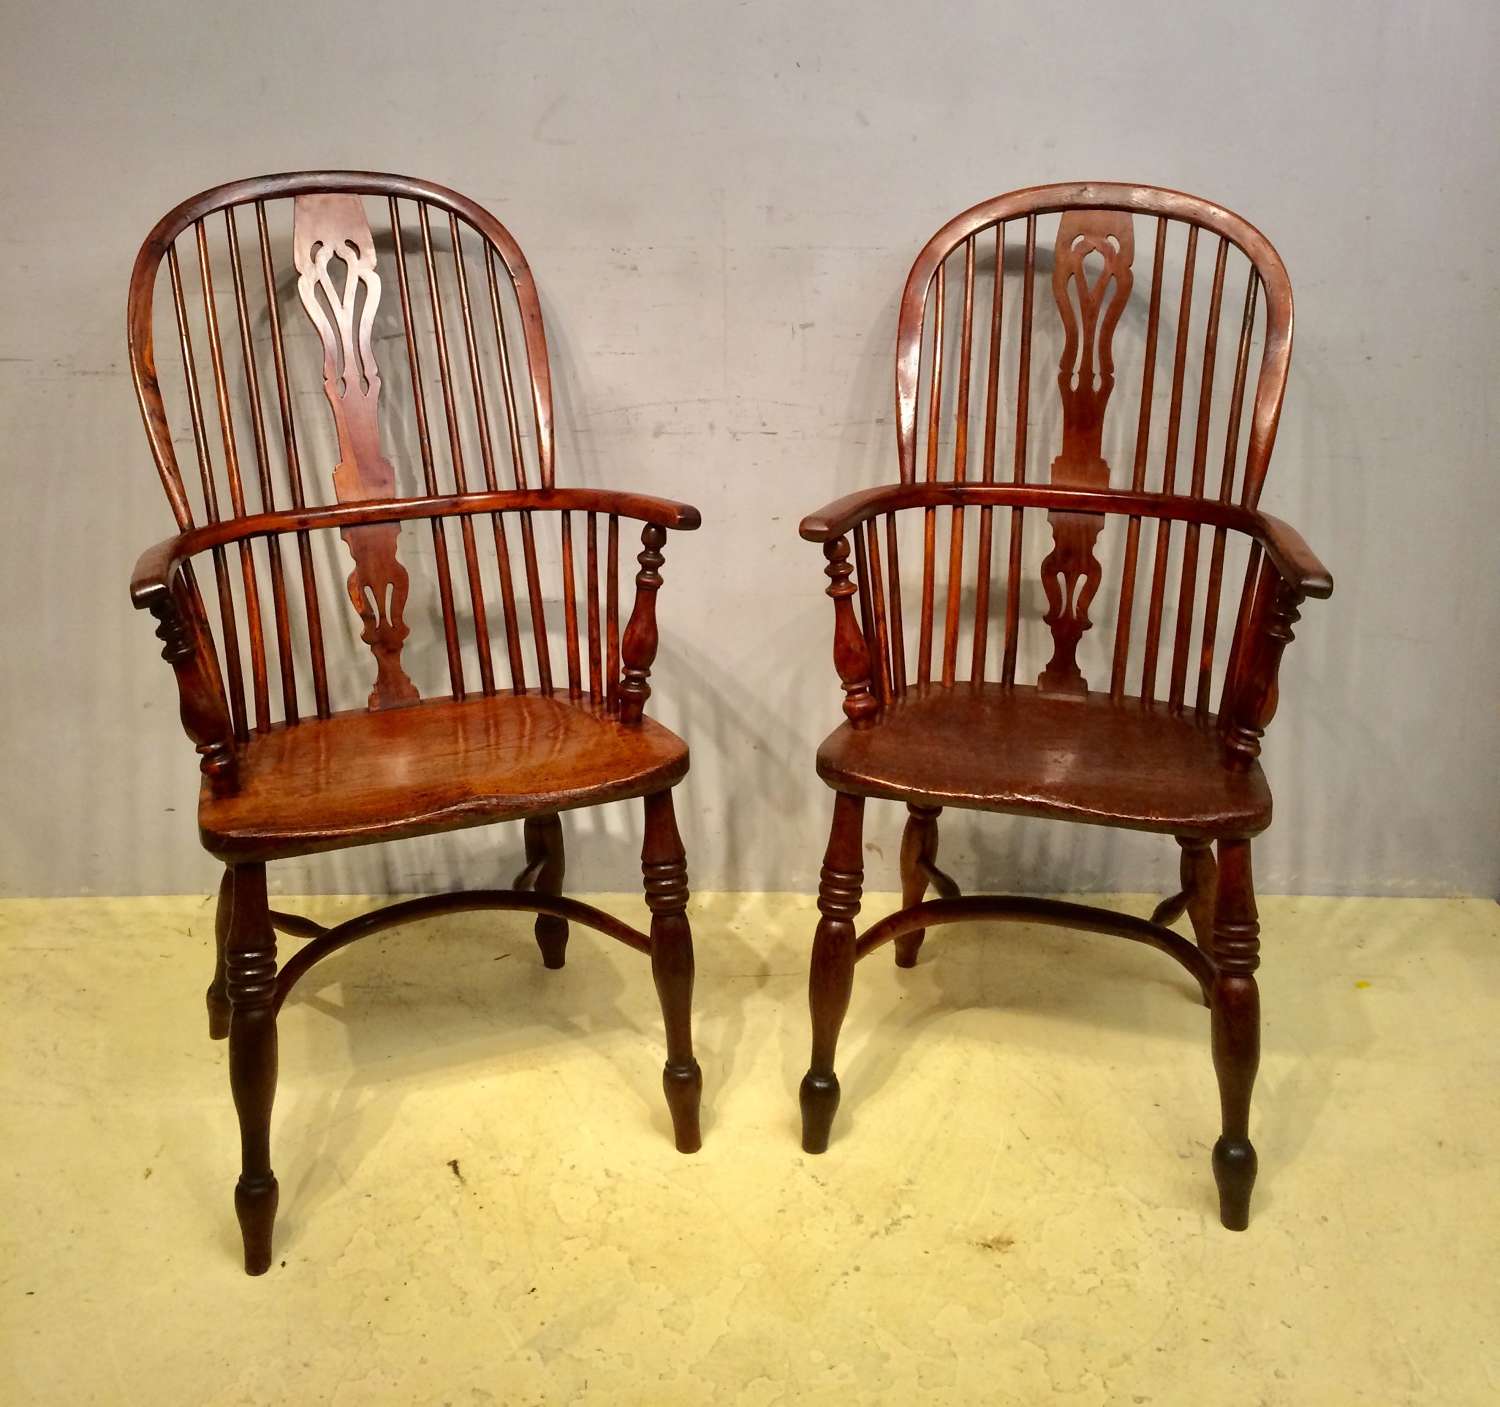 A matched pair of 19th century yew wood Windsor armchairs